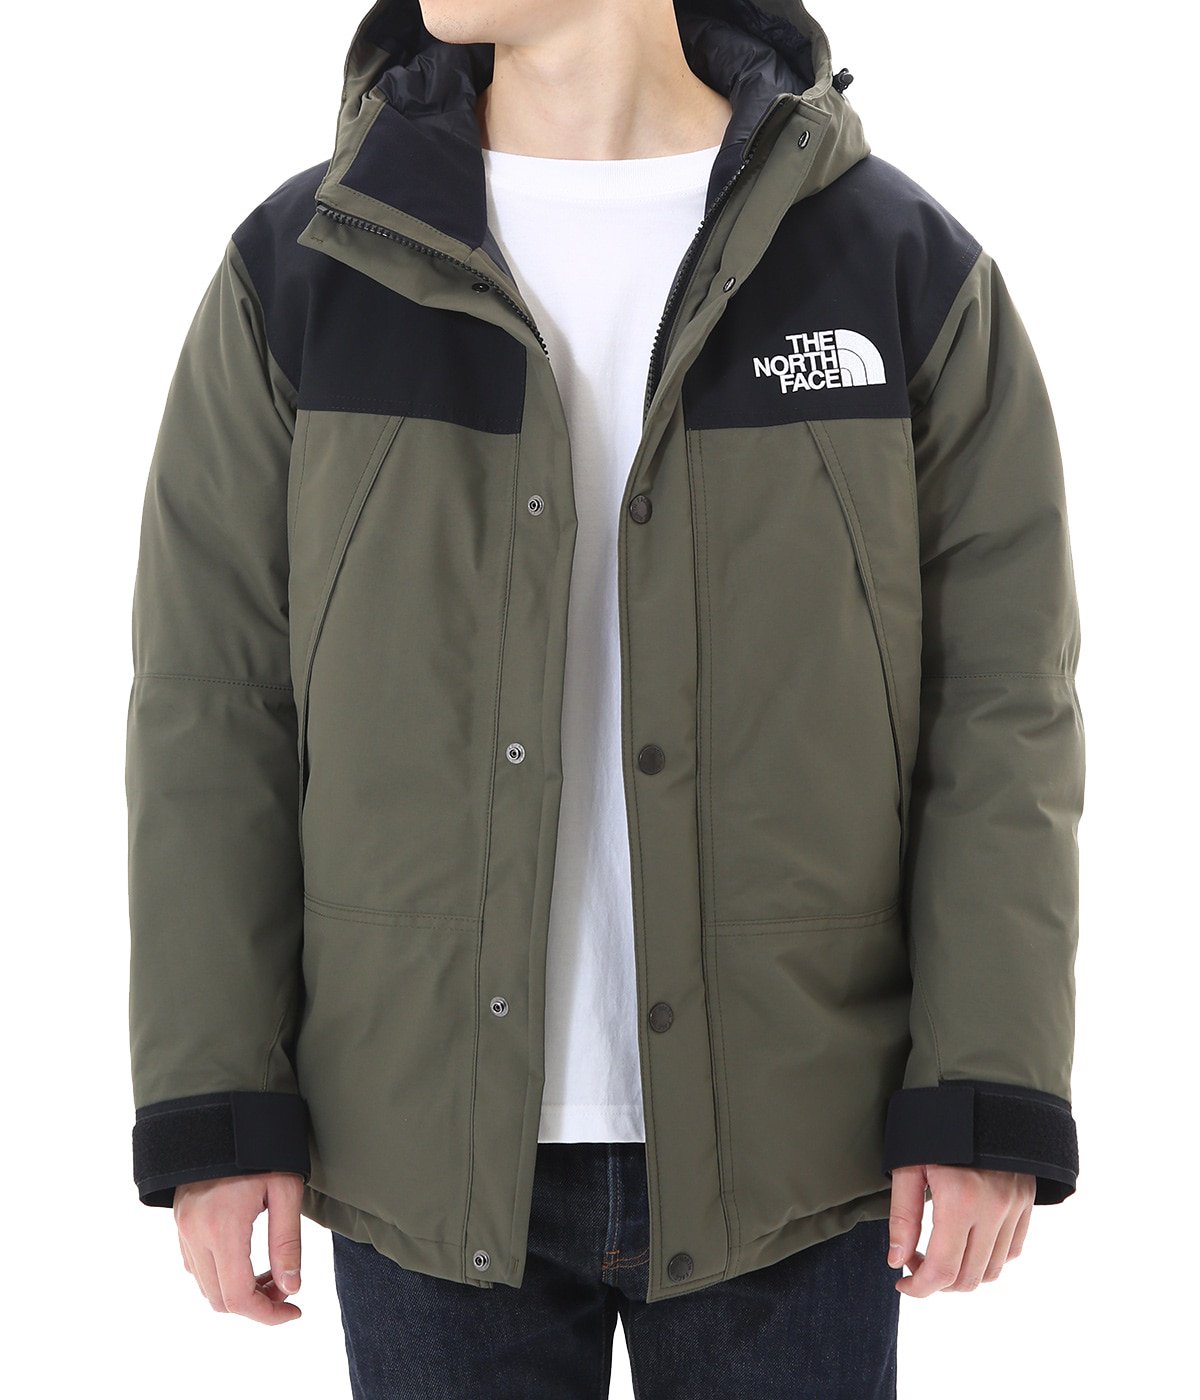 Mountain Down Jacket | THE NORTH FACE(ザ ノースフェイス 